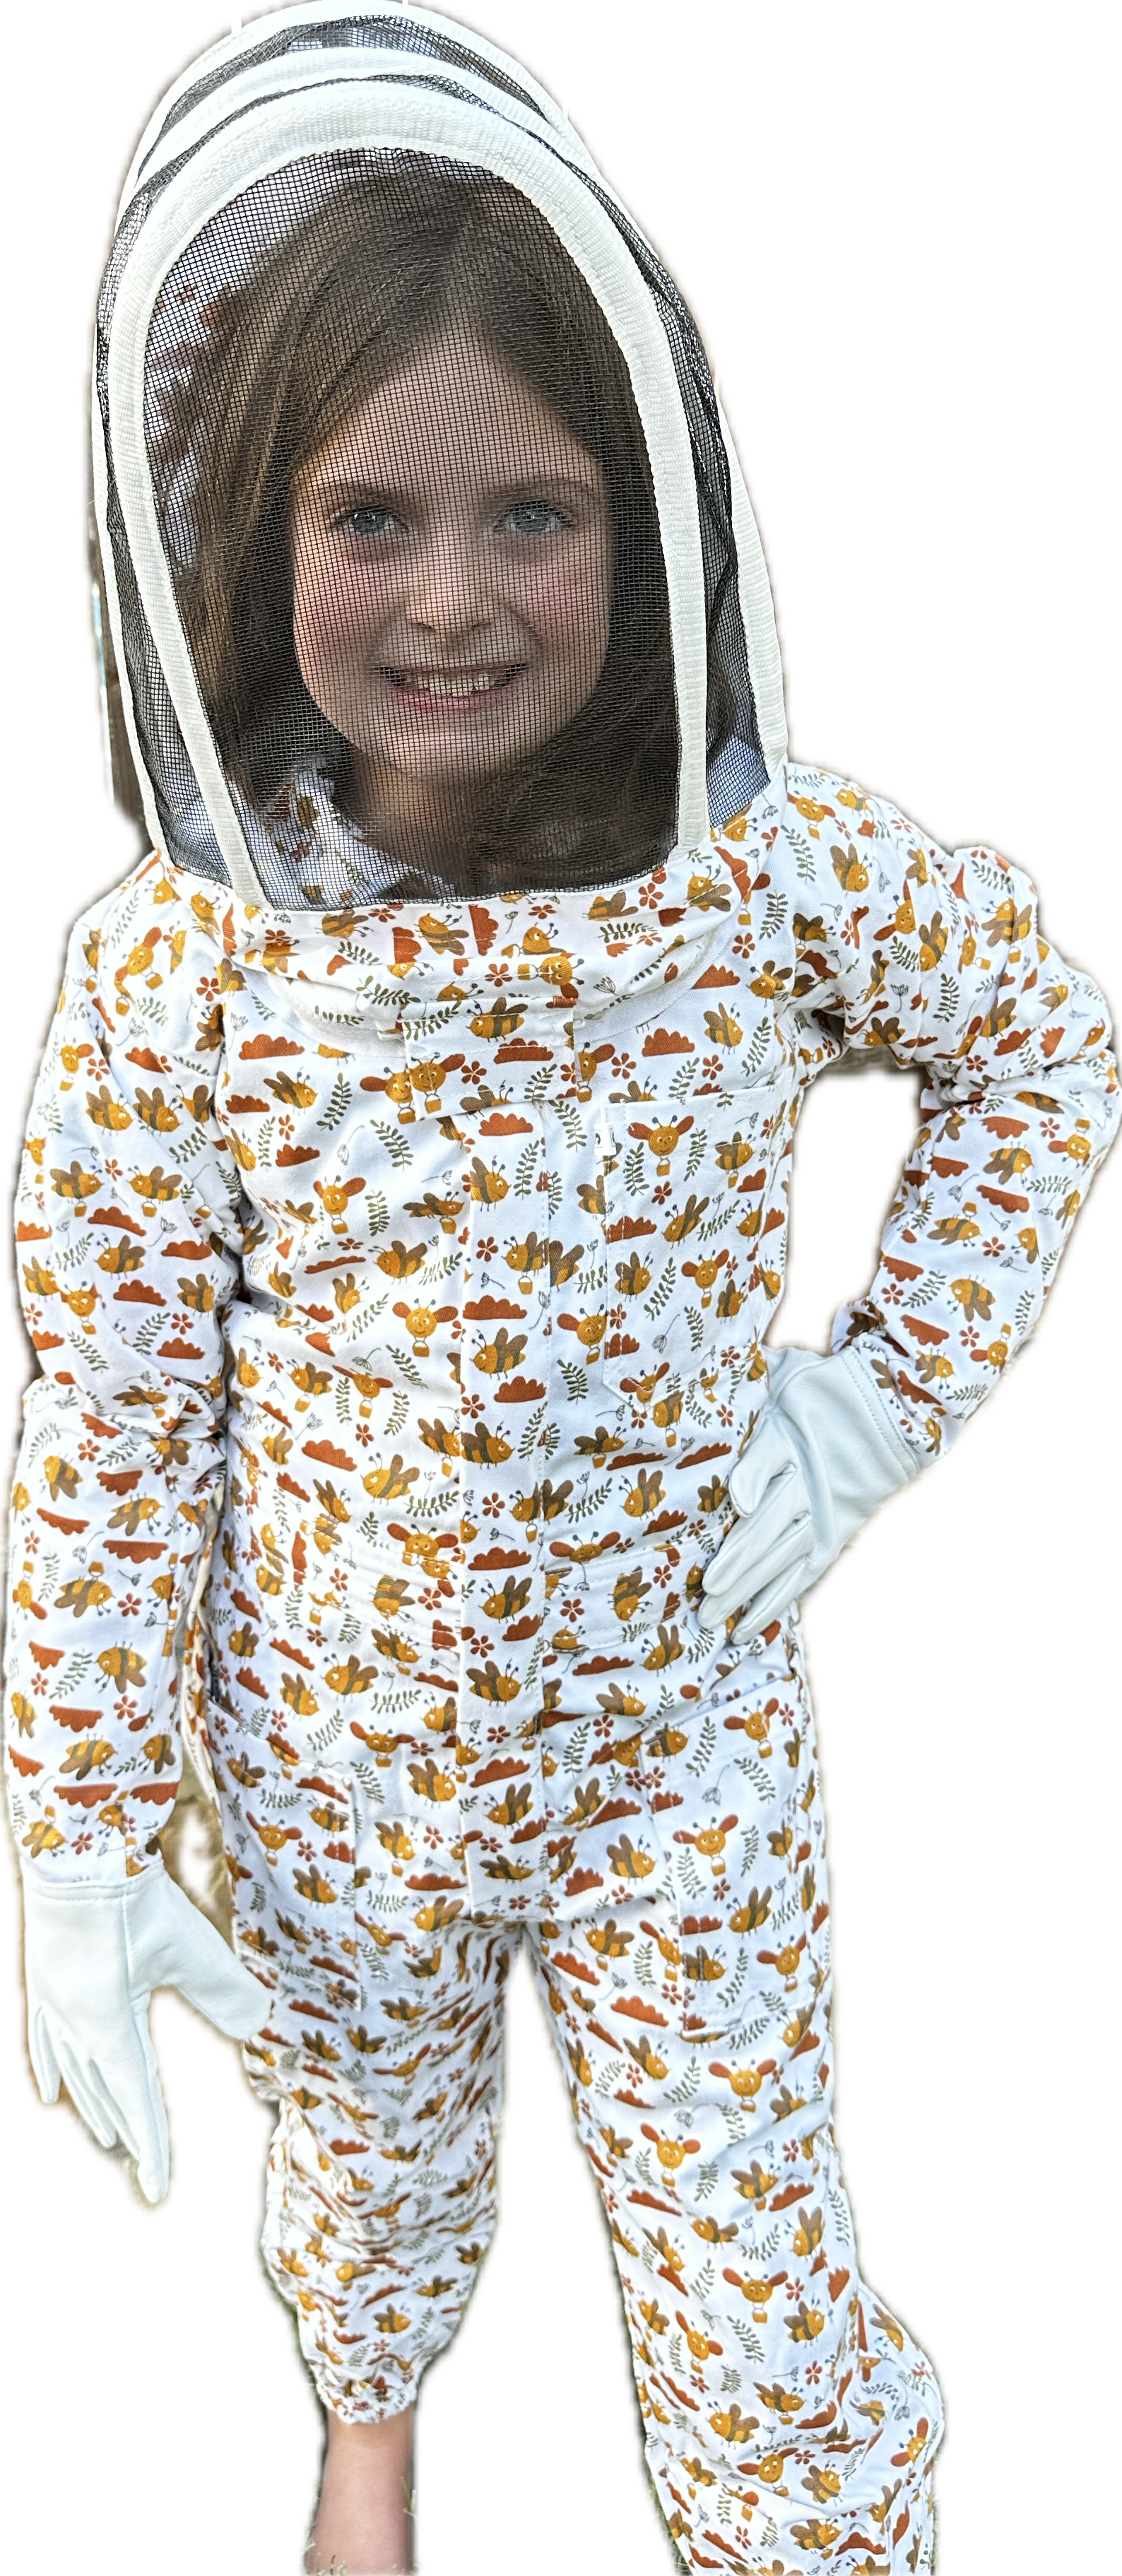 Adorable kids floral honey bee suit with protective fencing veil